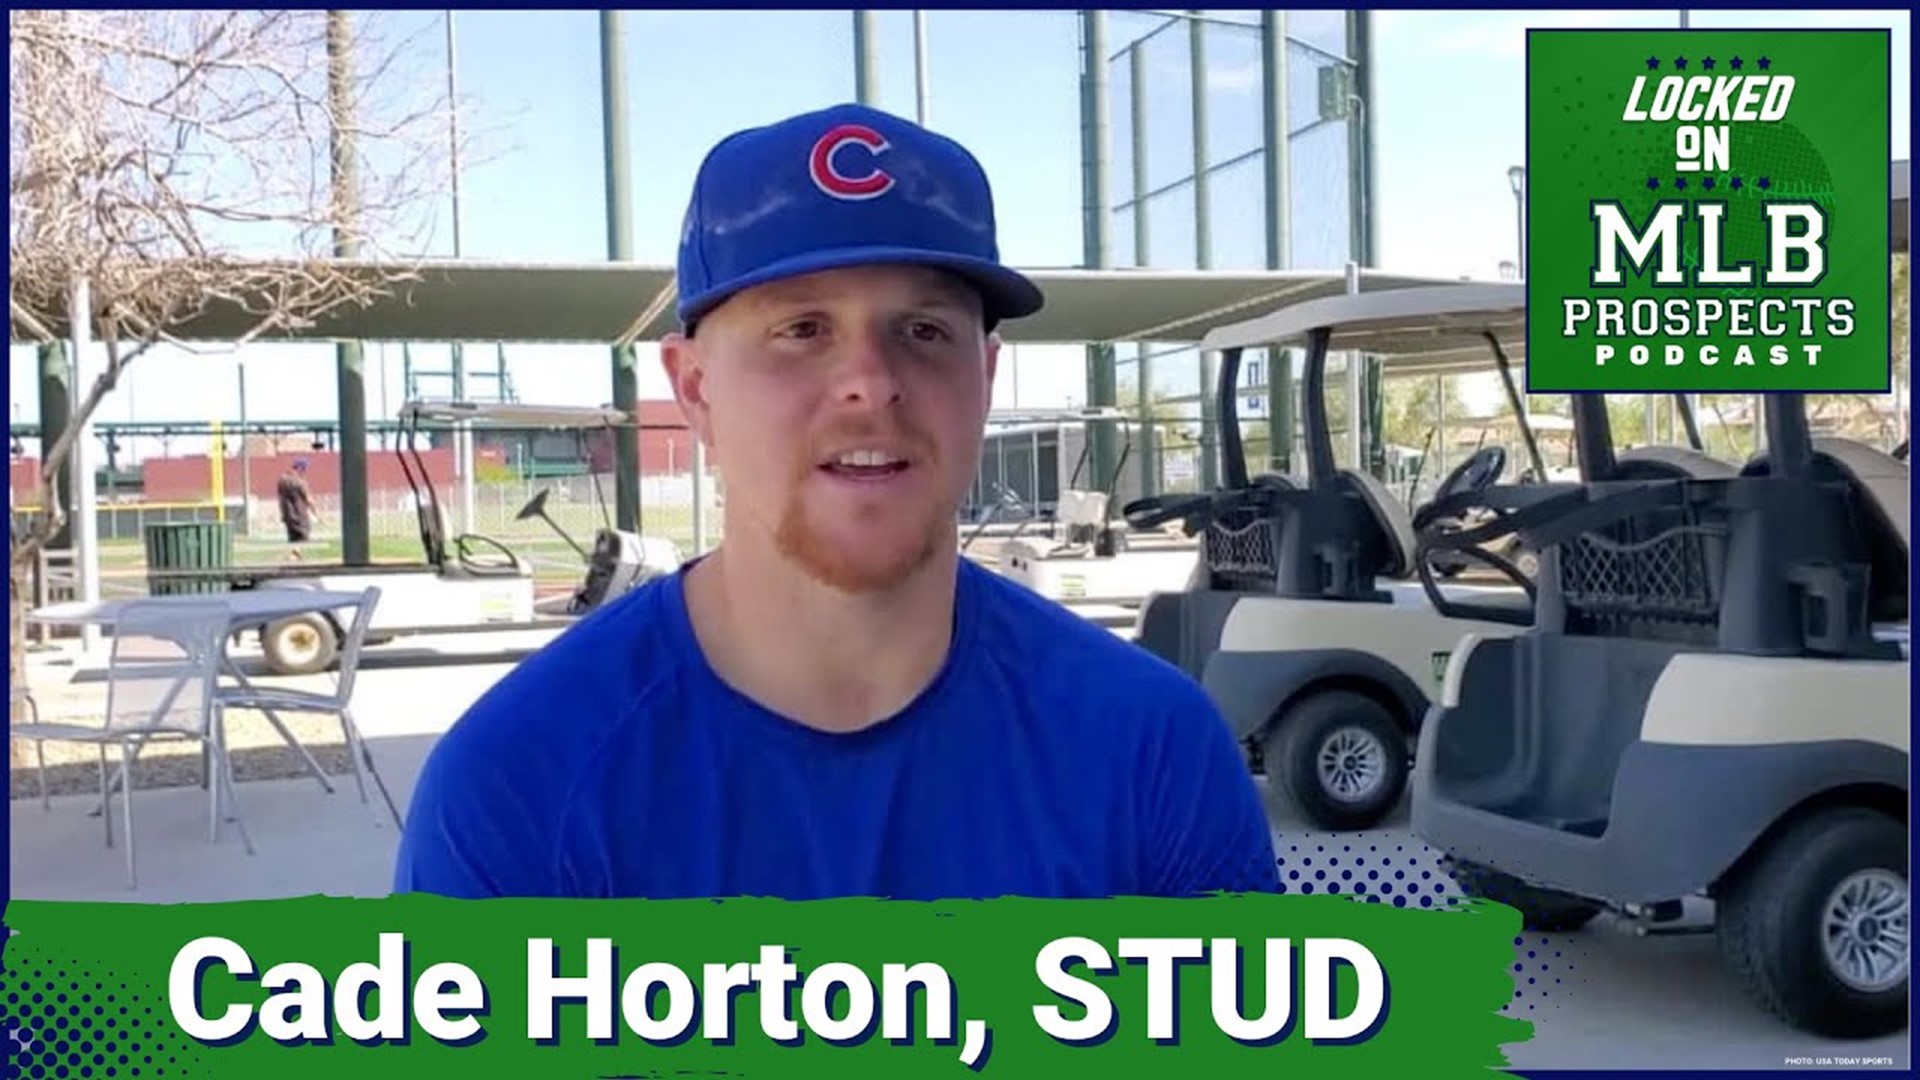 Wonder what the data says about your favorite prospect pitcher? We dove into it to check and see! 
Cade Horton of the Chicago Cubs has one of the best combinations